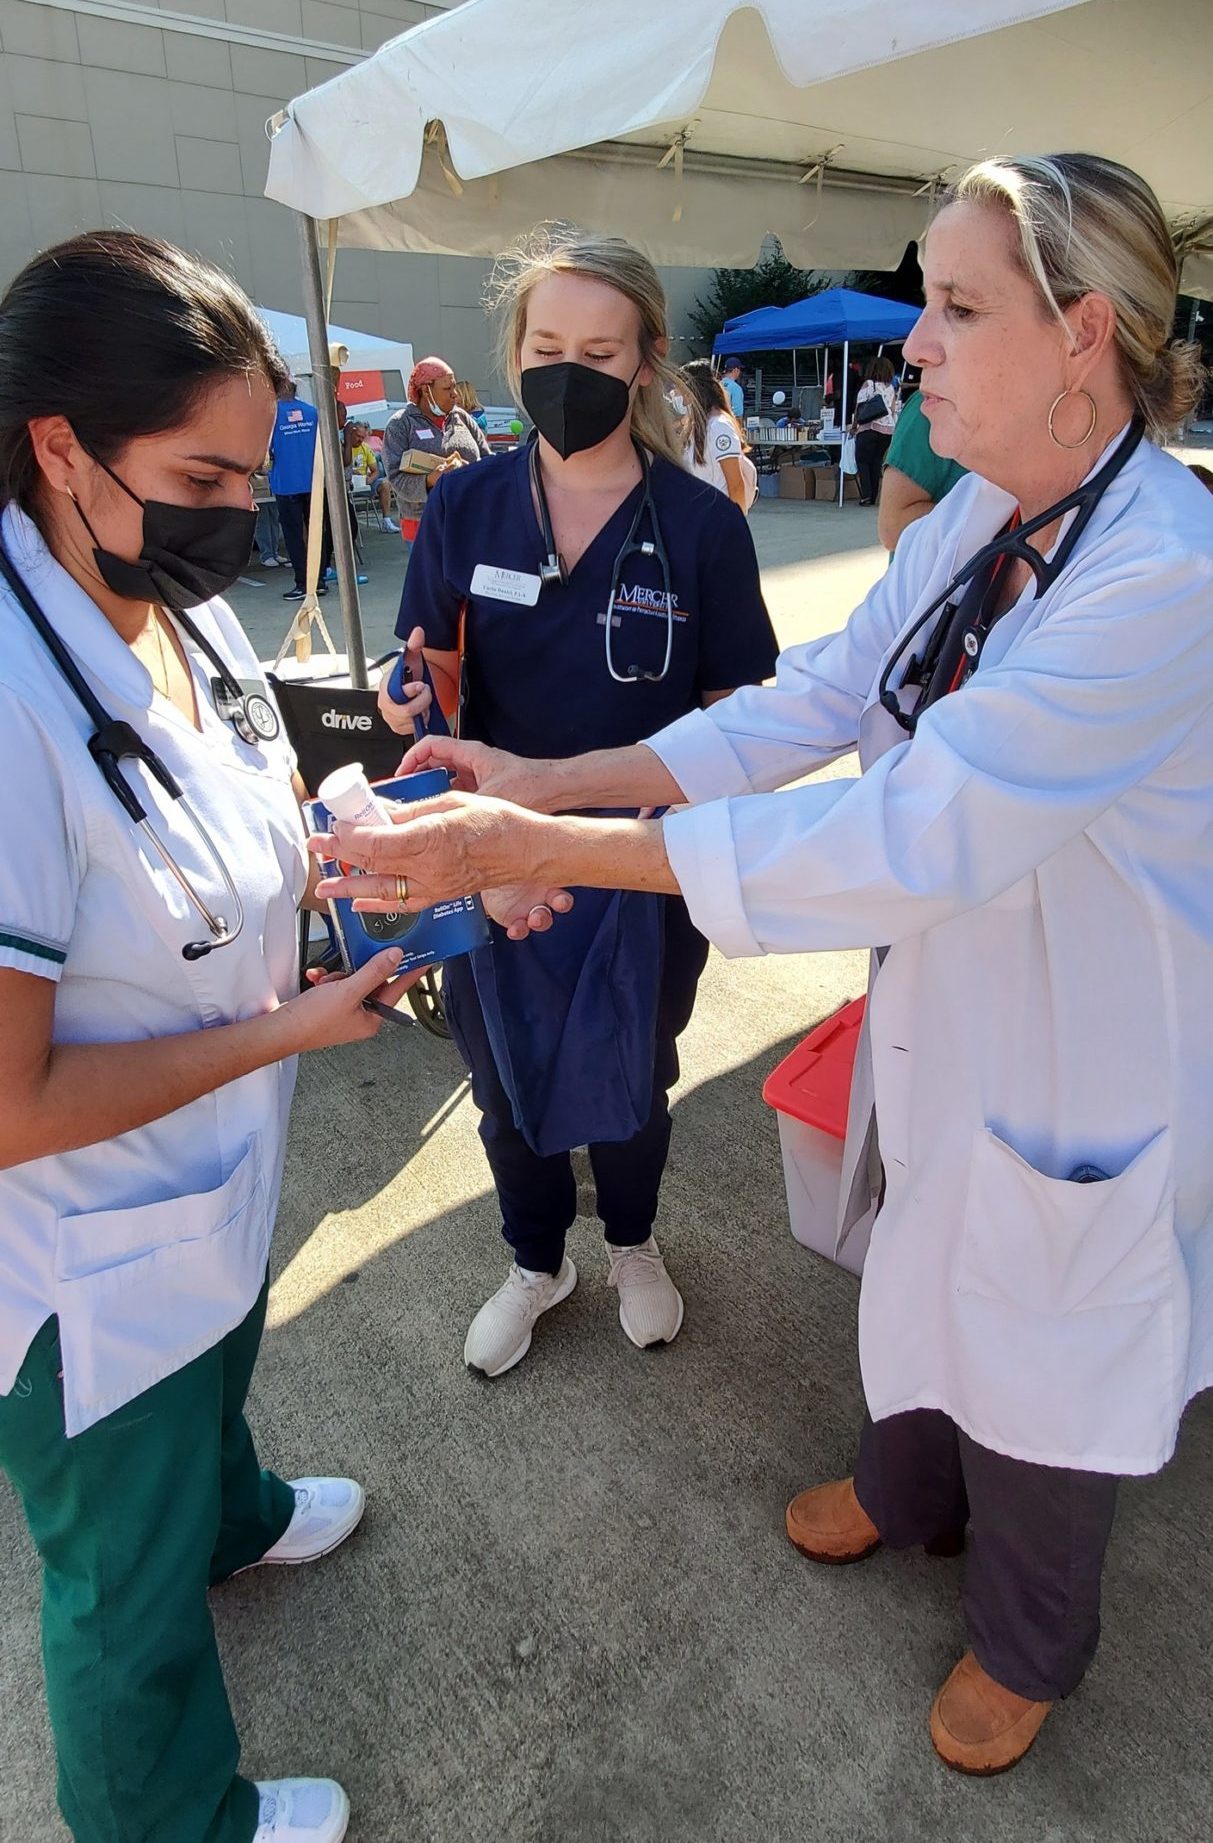 Erin Lepp, at right, clinical associate professor and coordinator of physician assistant community engagement and medical team lead for the event, gives diabetic supplies to students volunteering at the event.